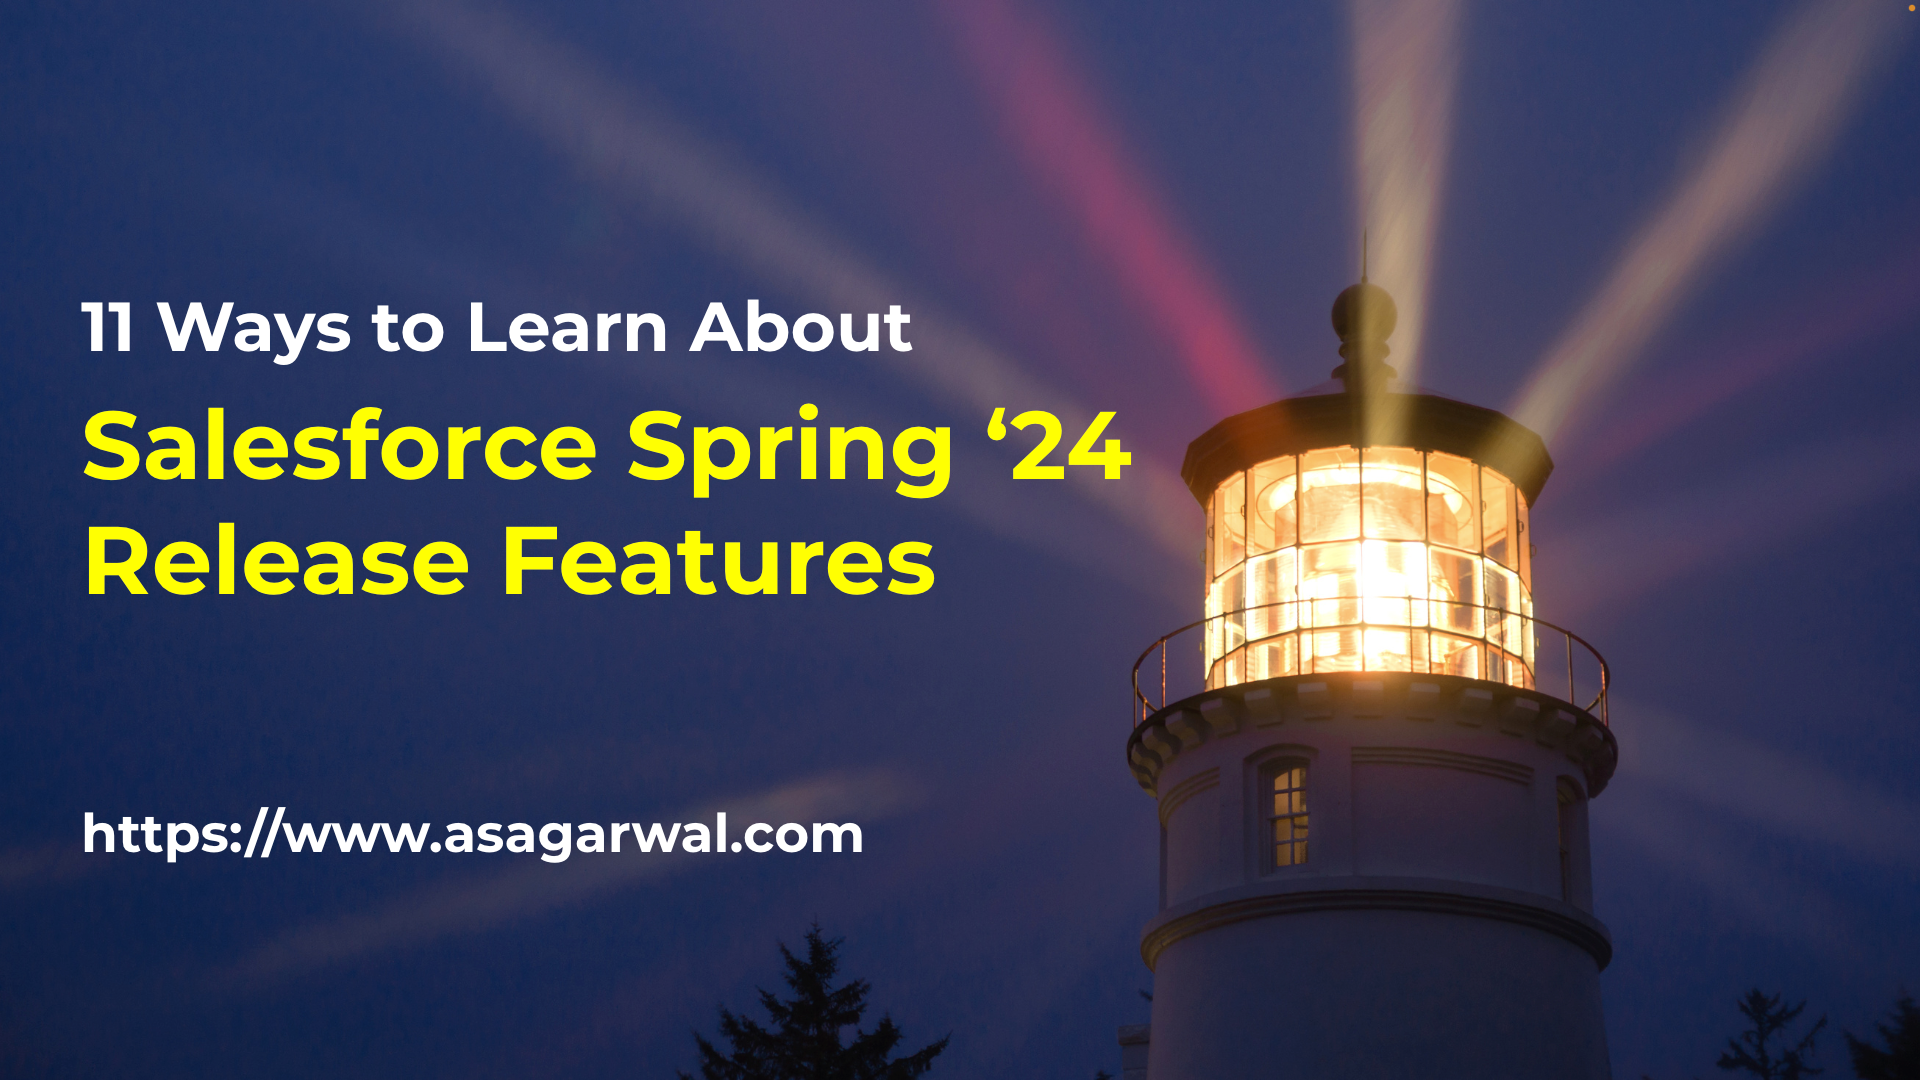 Ways to Learn About Salesforce Spring ’24 Release Features